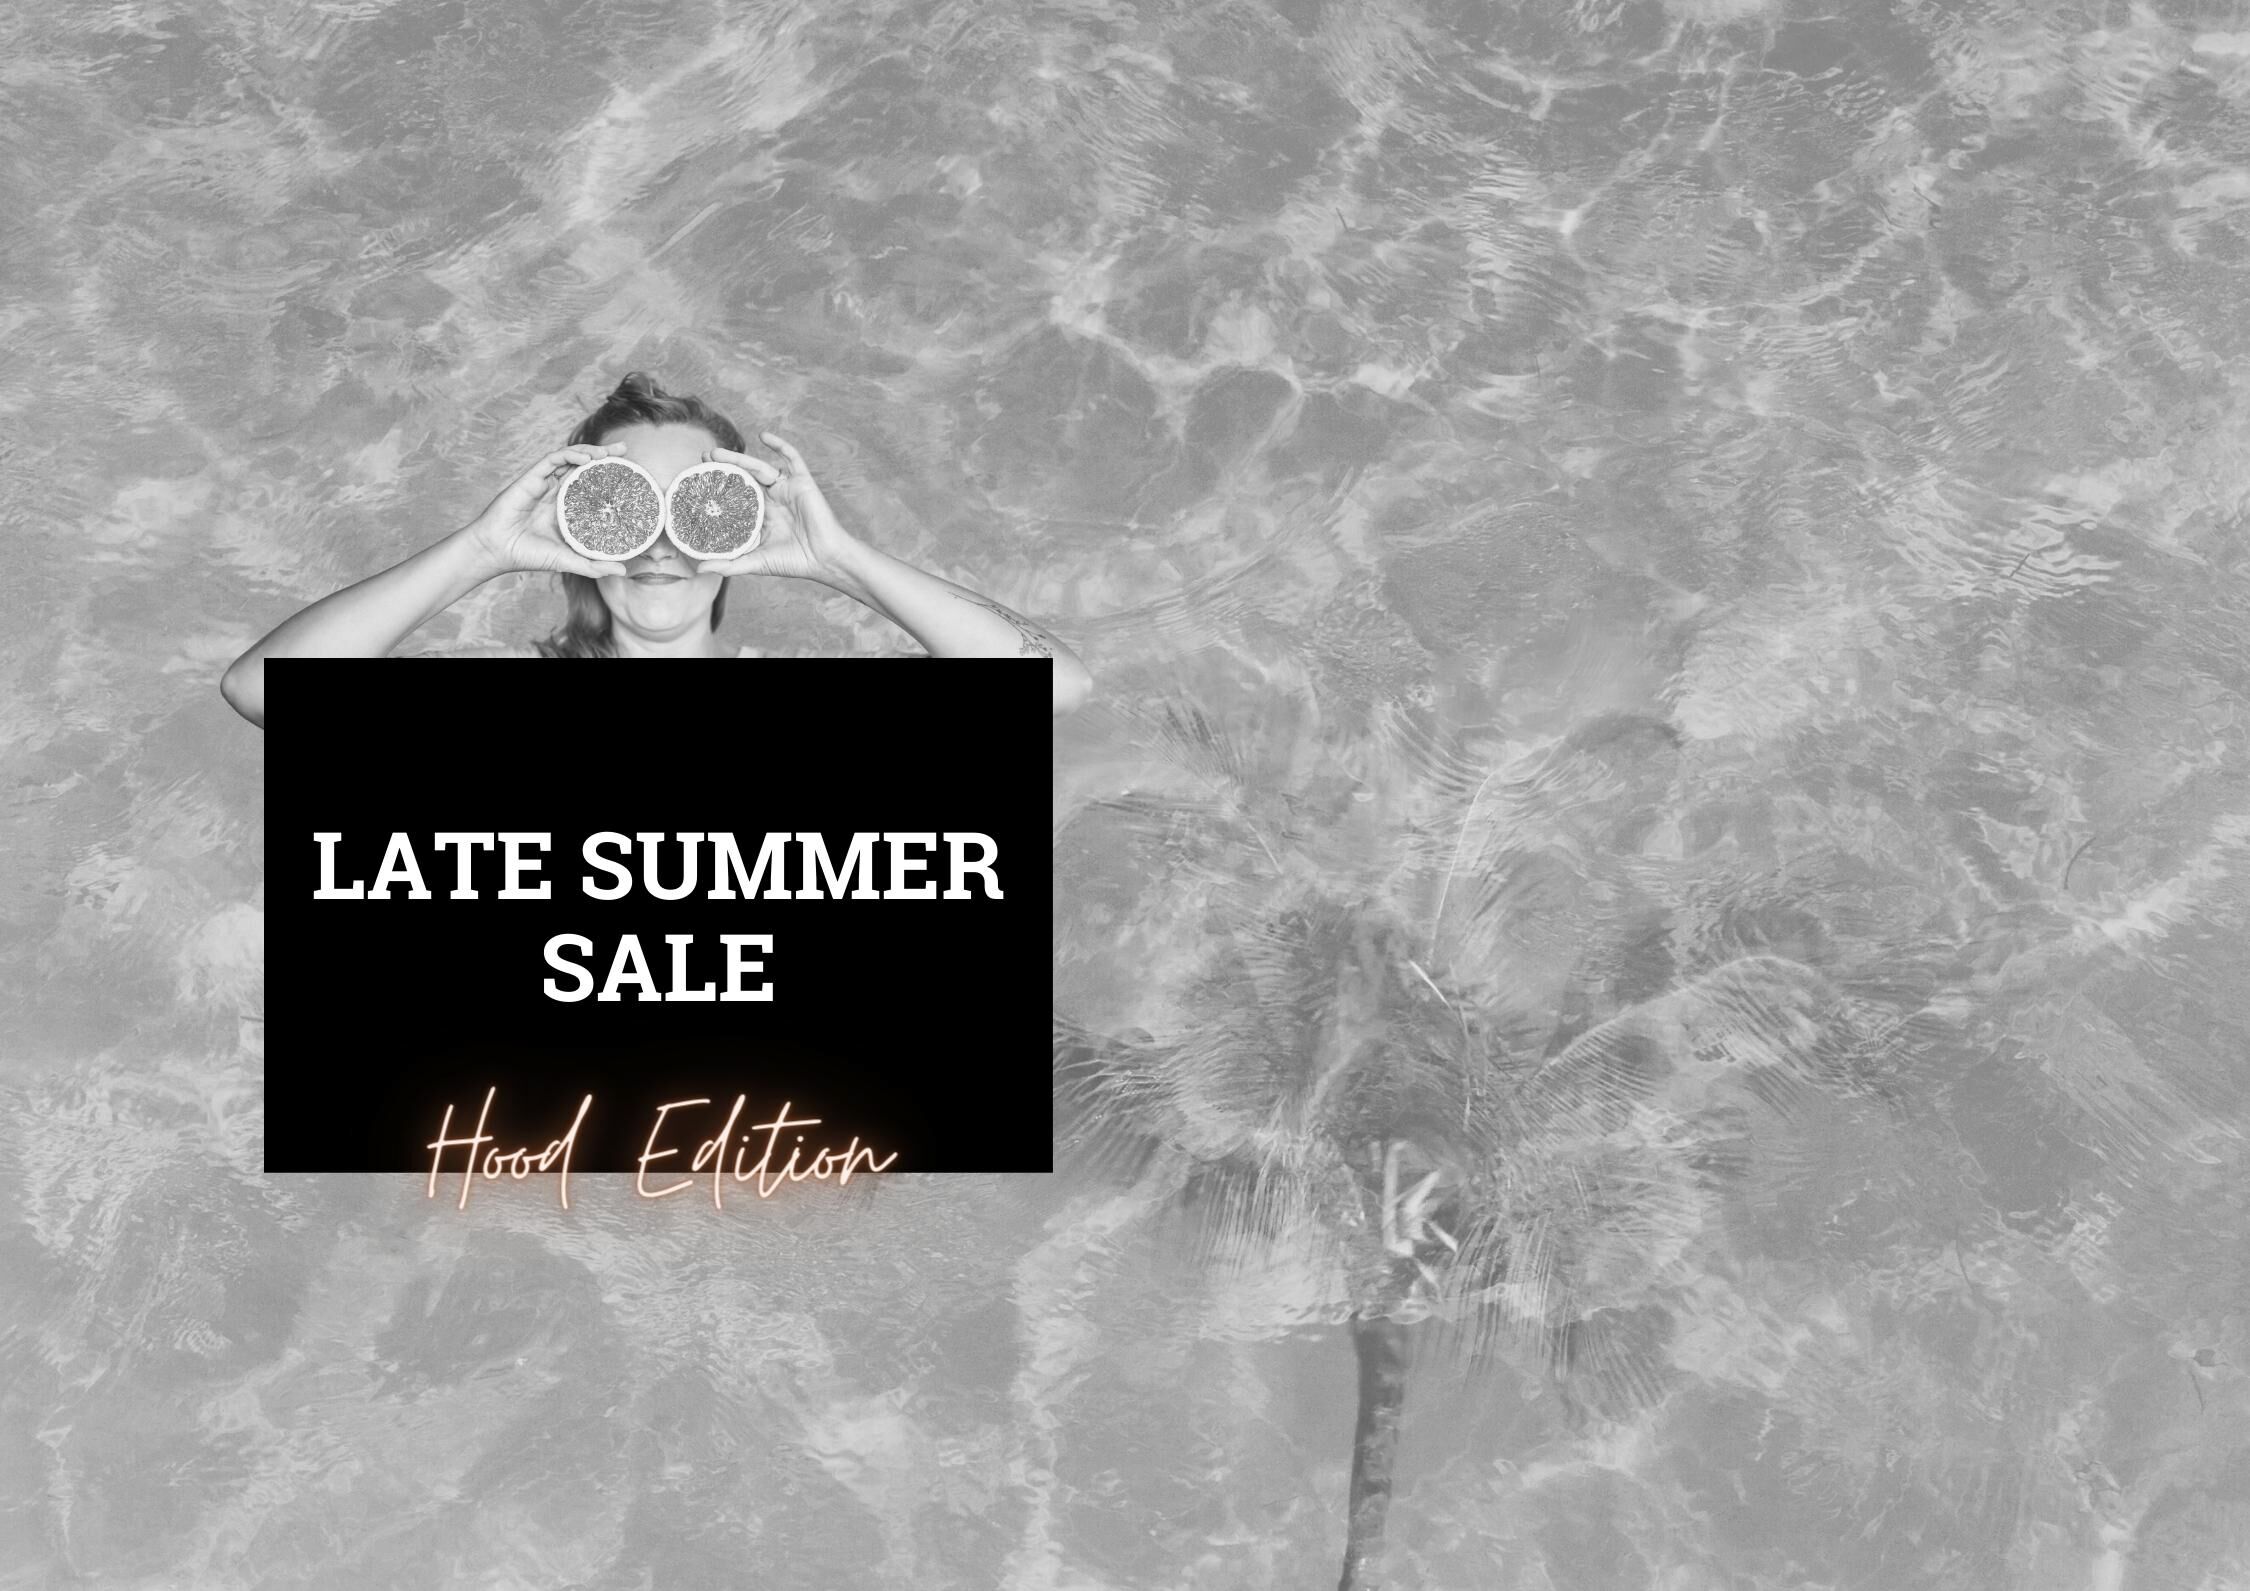 Late Summer Sale 2023 297 X 210 Mm